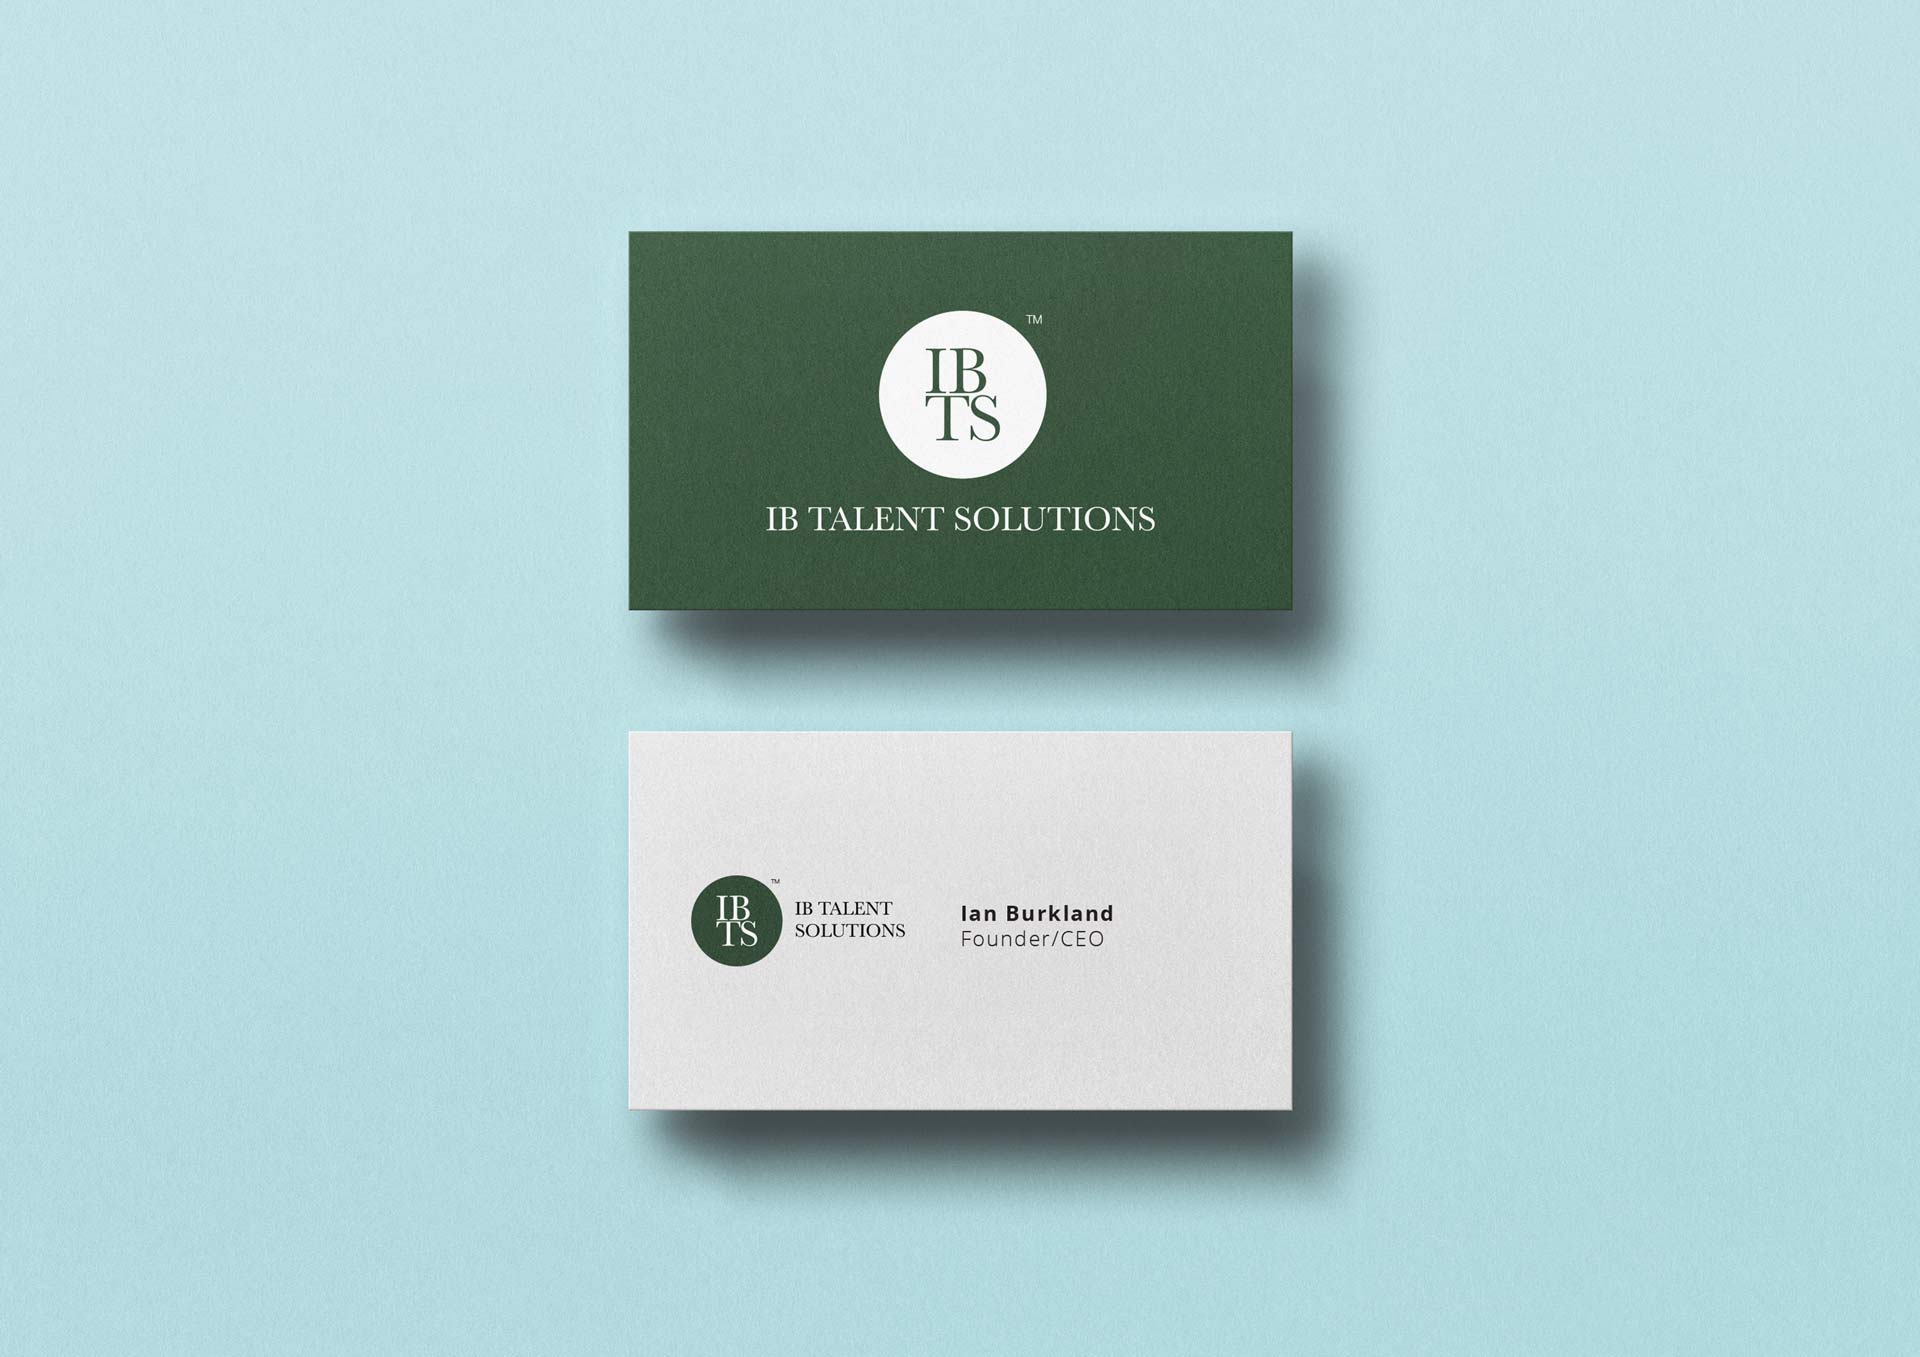 The front and back side of the branded business card.